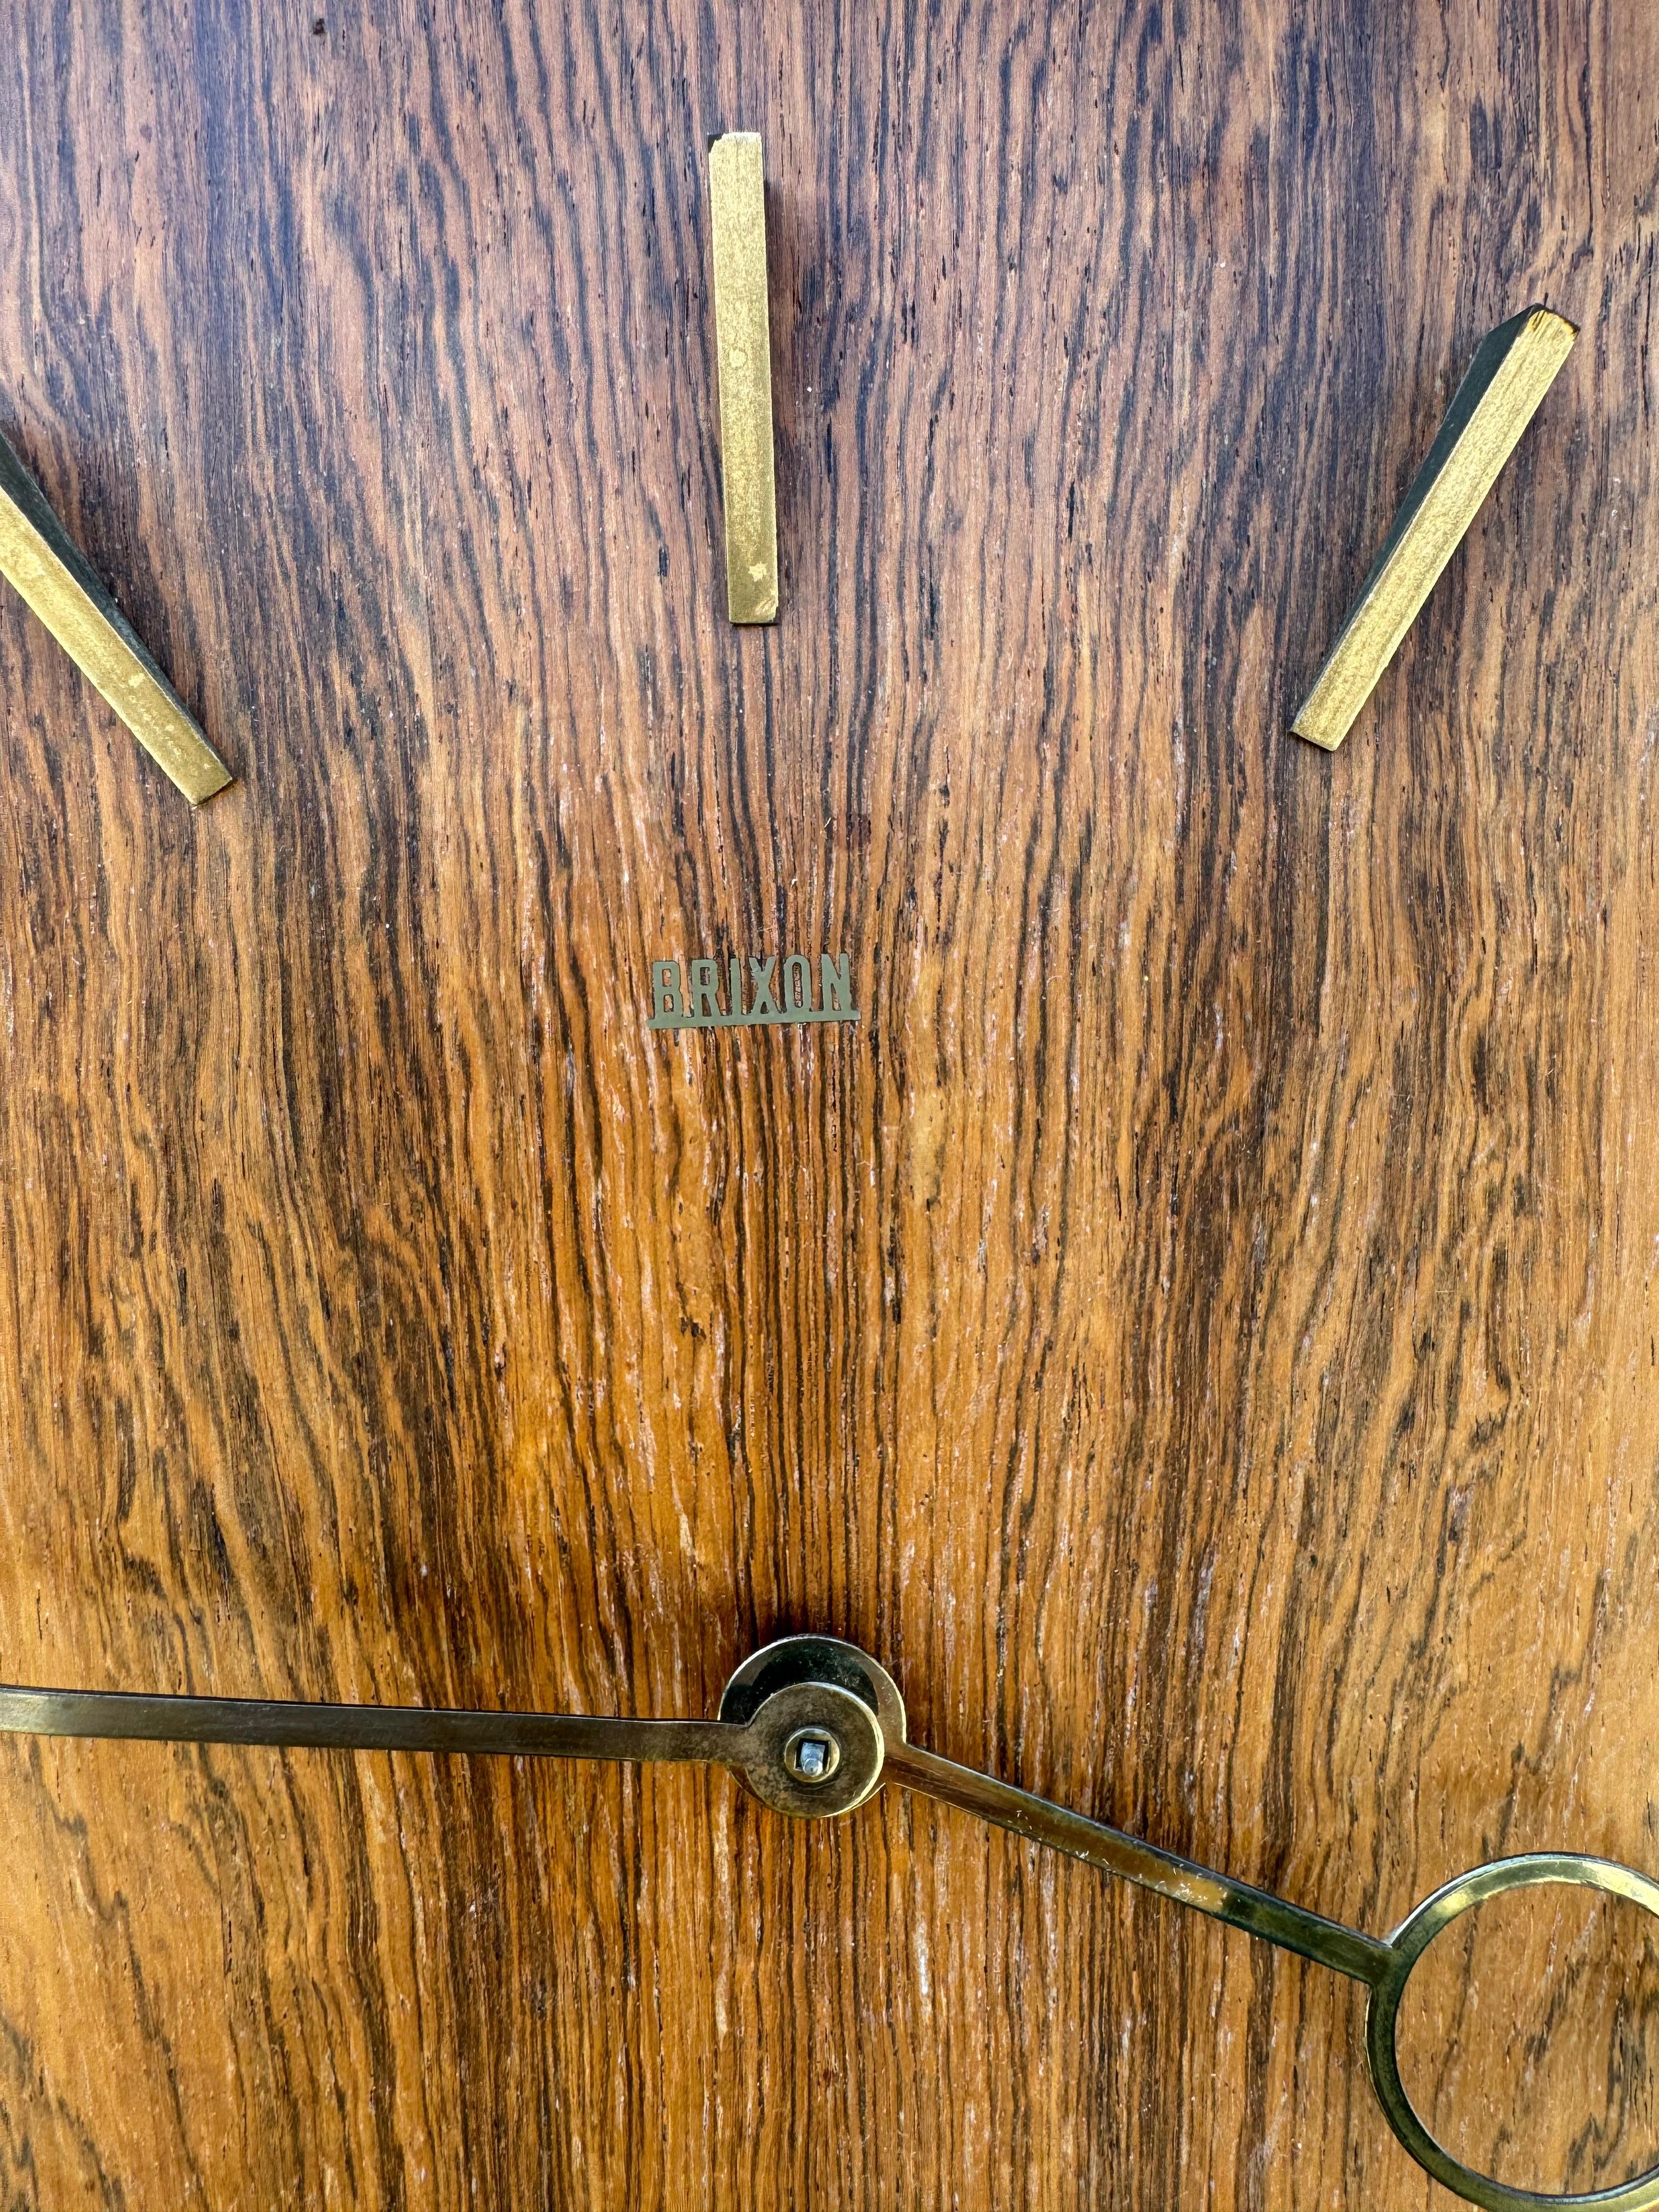 Danish Mid Century Modern Teak And Brass Pendulum Wall Clock By Brixon In Good Condition For Sale In San Carlos, CA